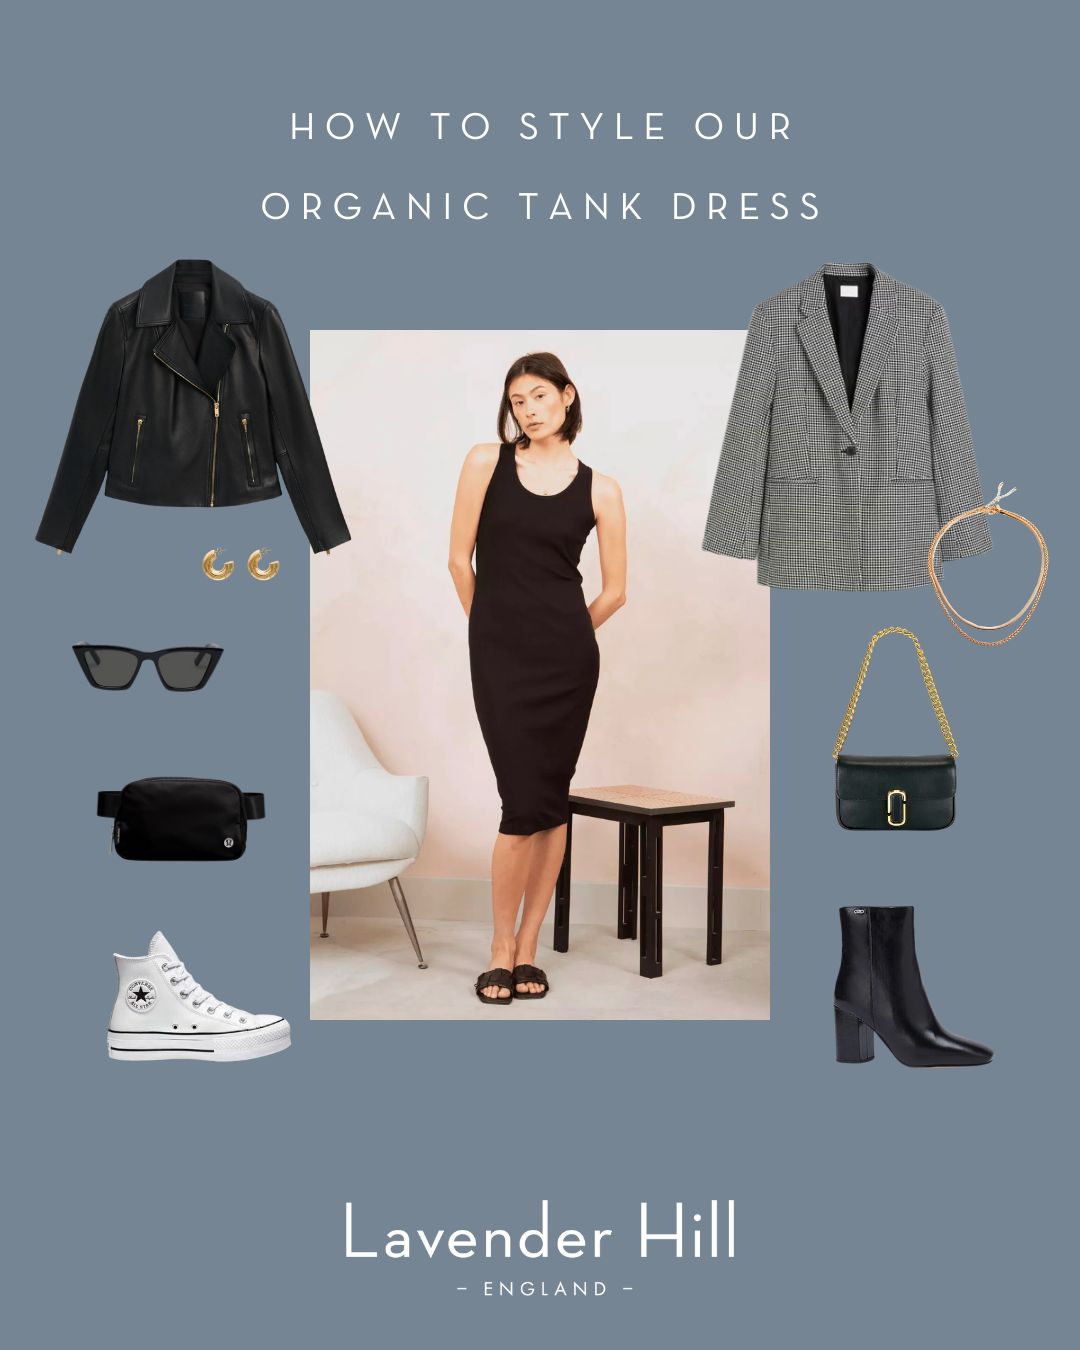 How to style a ribbed tank dress